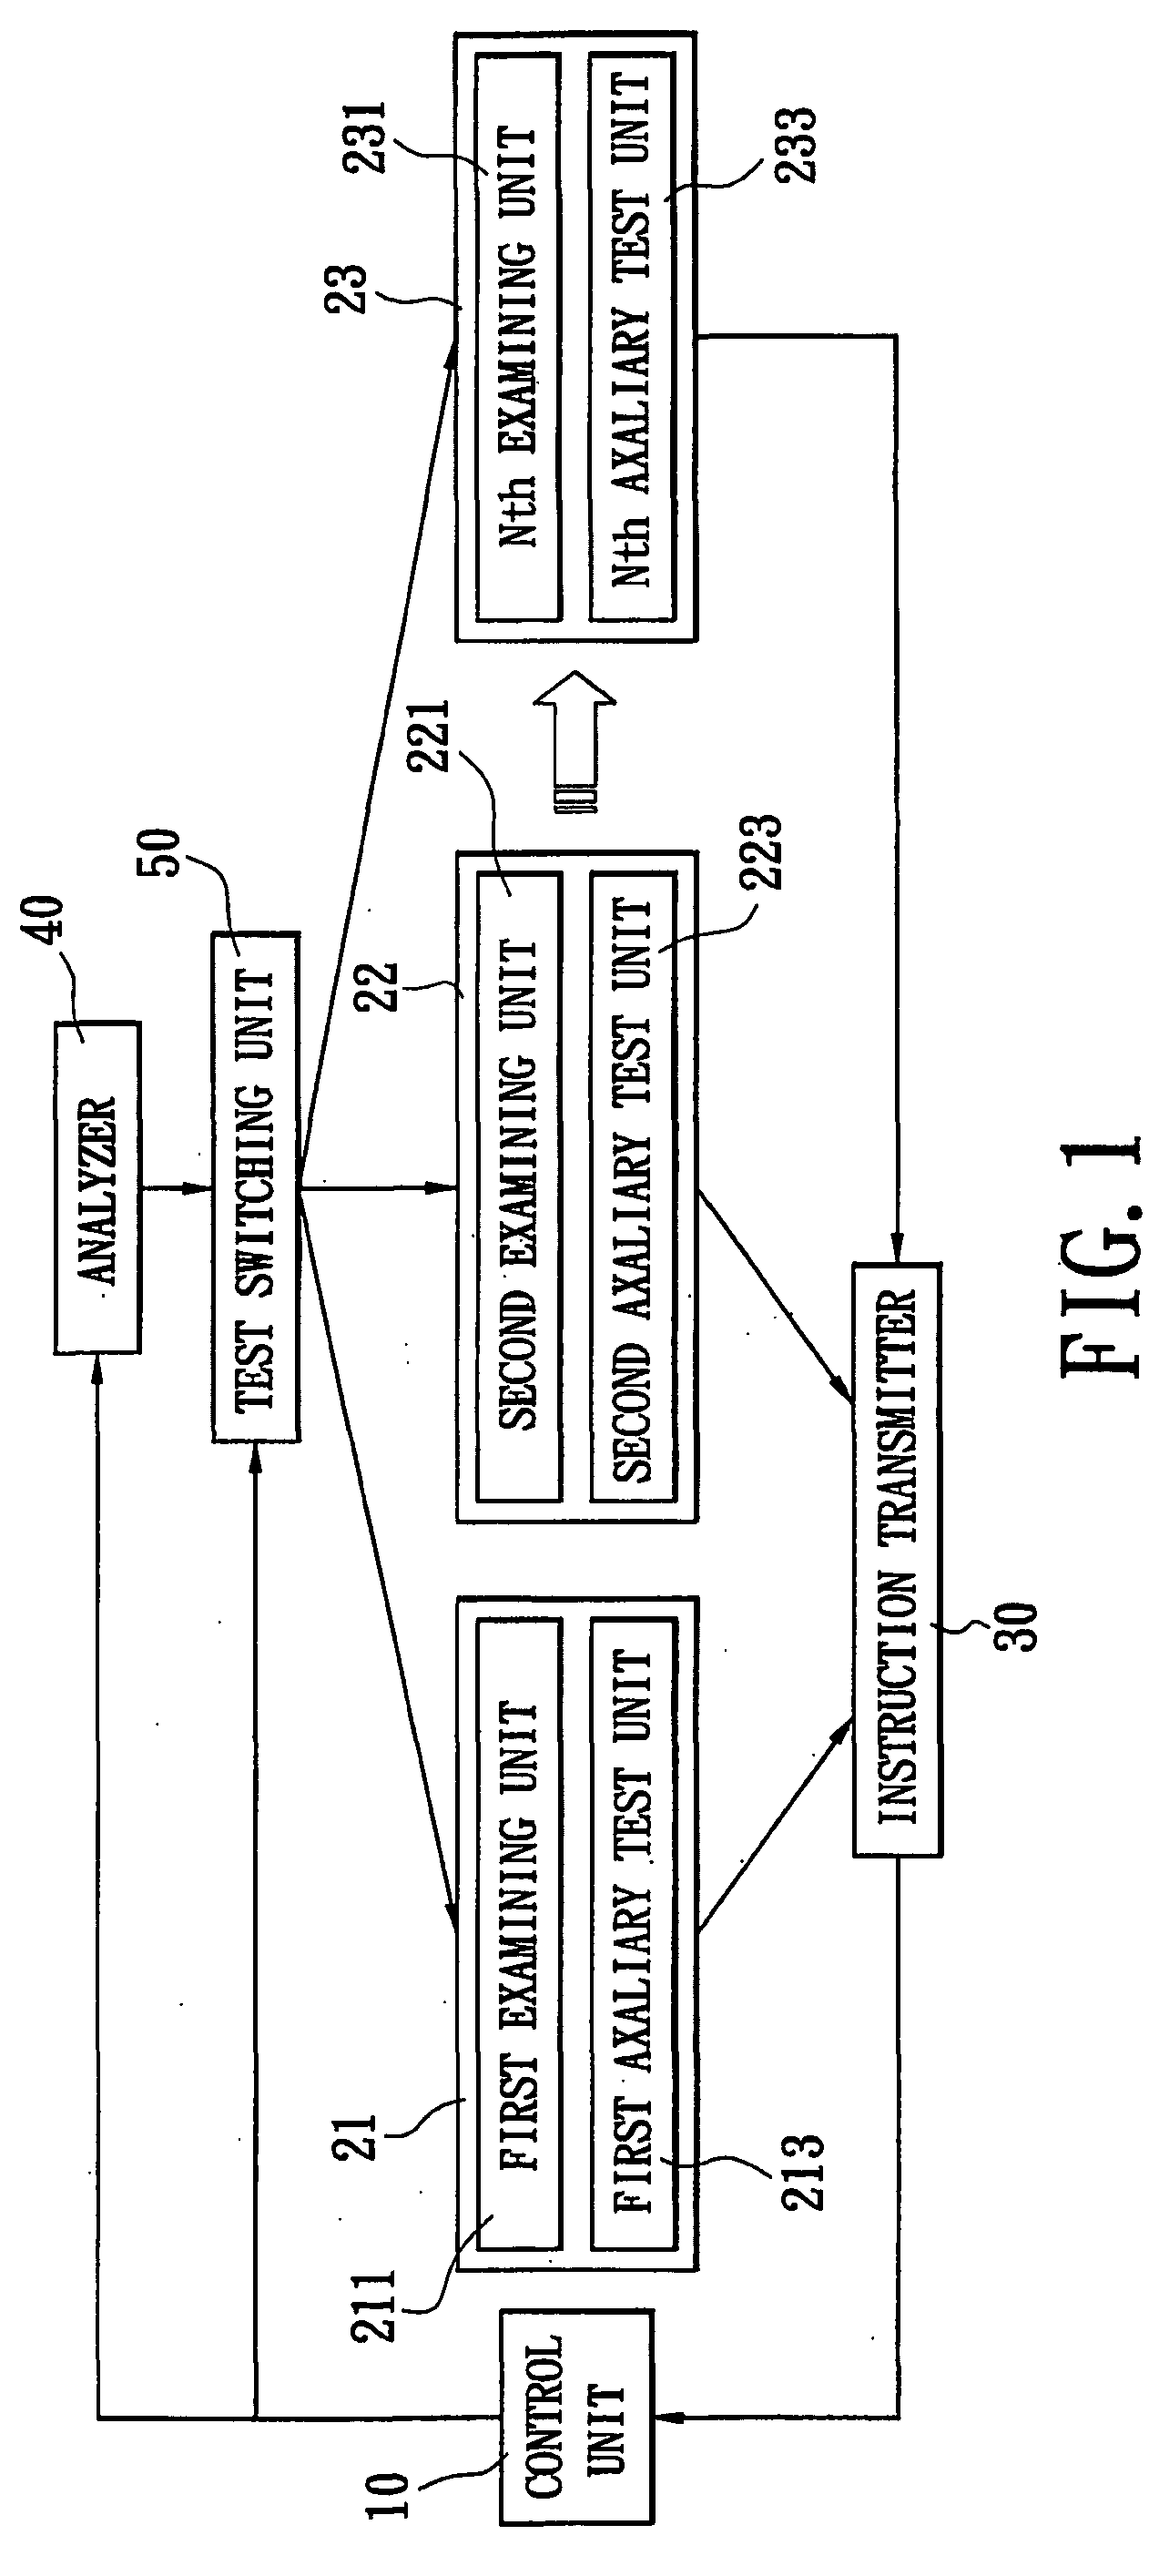 Integrated testing system for wireless and high frequency products and a testing method thereof